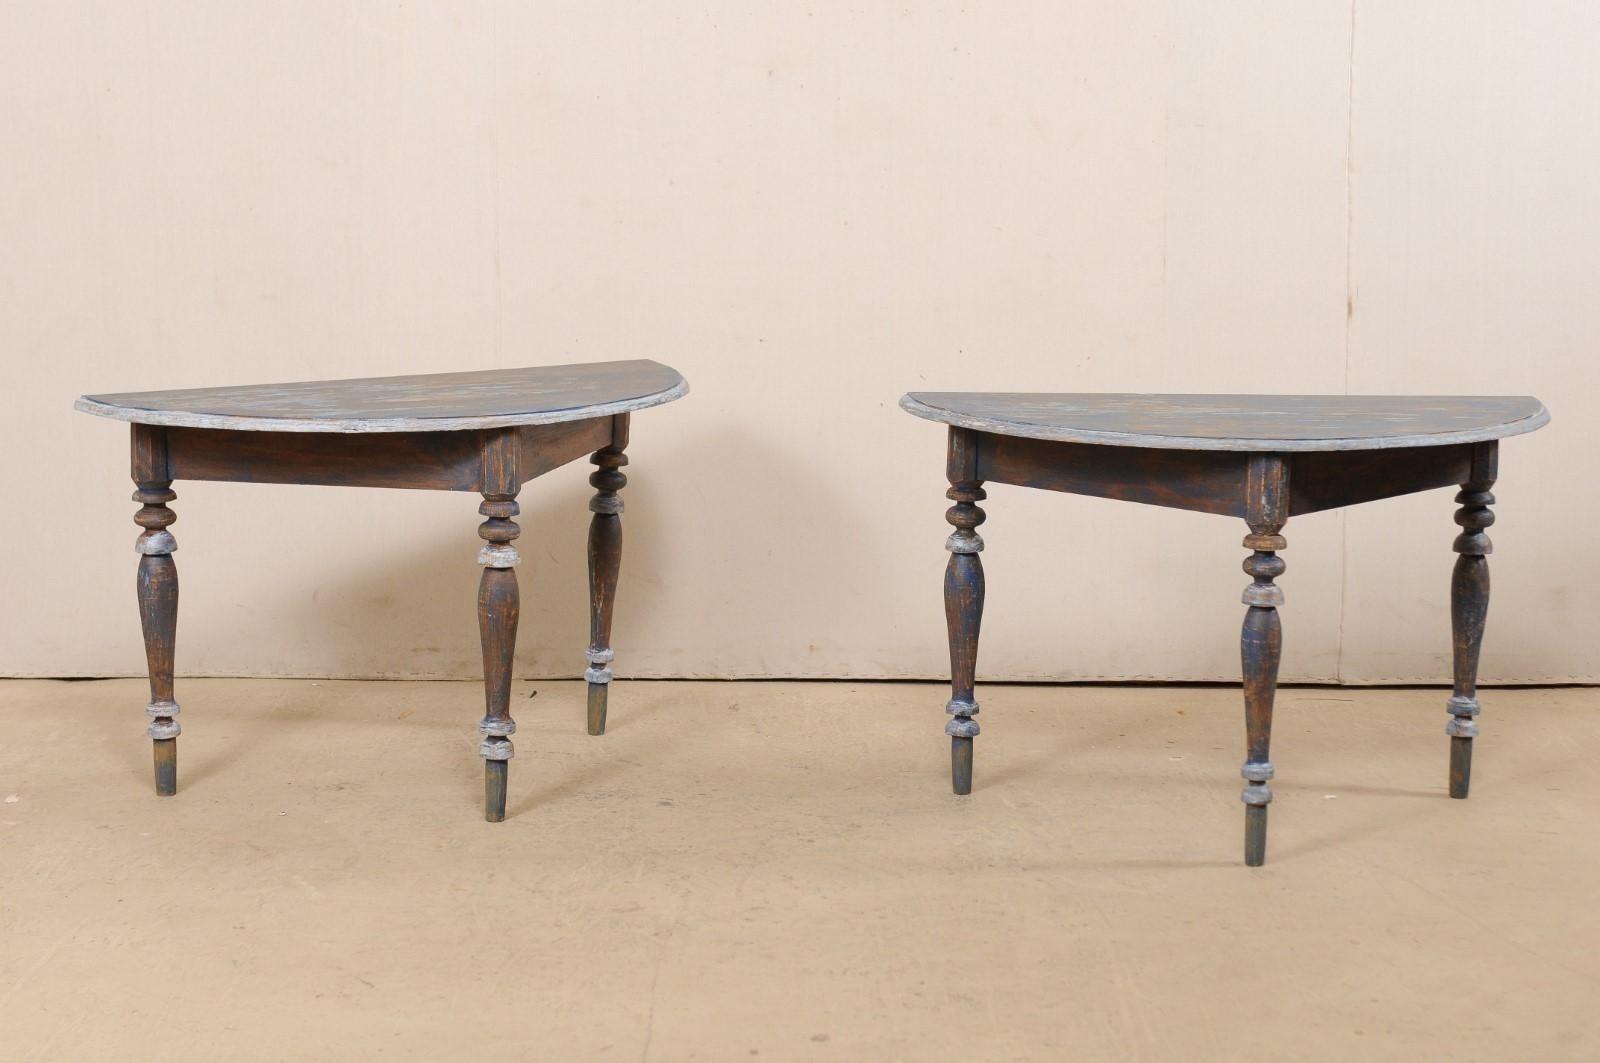 A pair of 19th century Swedish painted wood demilune tables. This pair of antique demilune tables from Sweden each features semi-circular tops over triangular-shaped aprons, which are presented upon three shapely legs which are nicely turned and